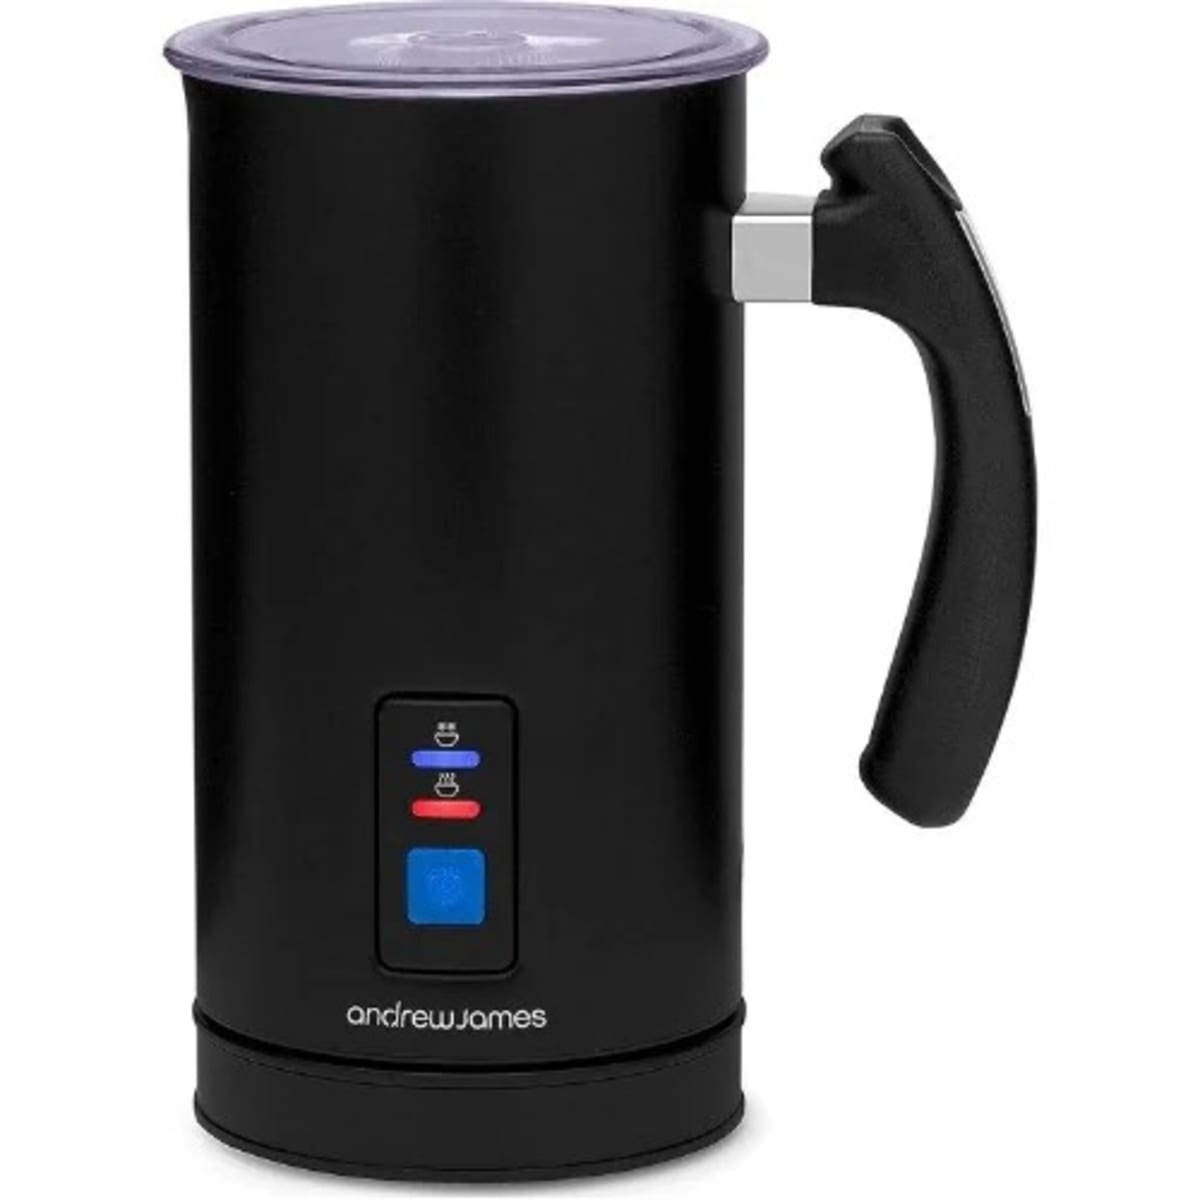 Andrew James Electric Milk Frother & Heater Warmer - 300ml - 500w - Tl1403